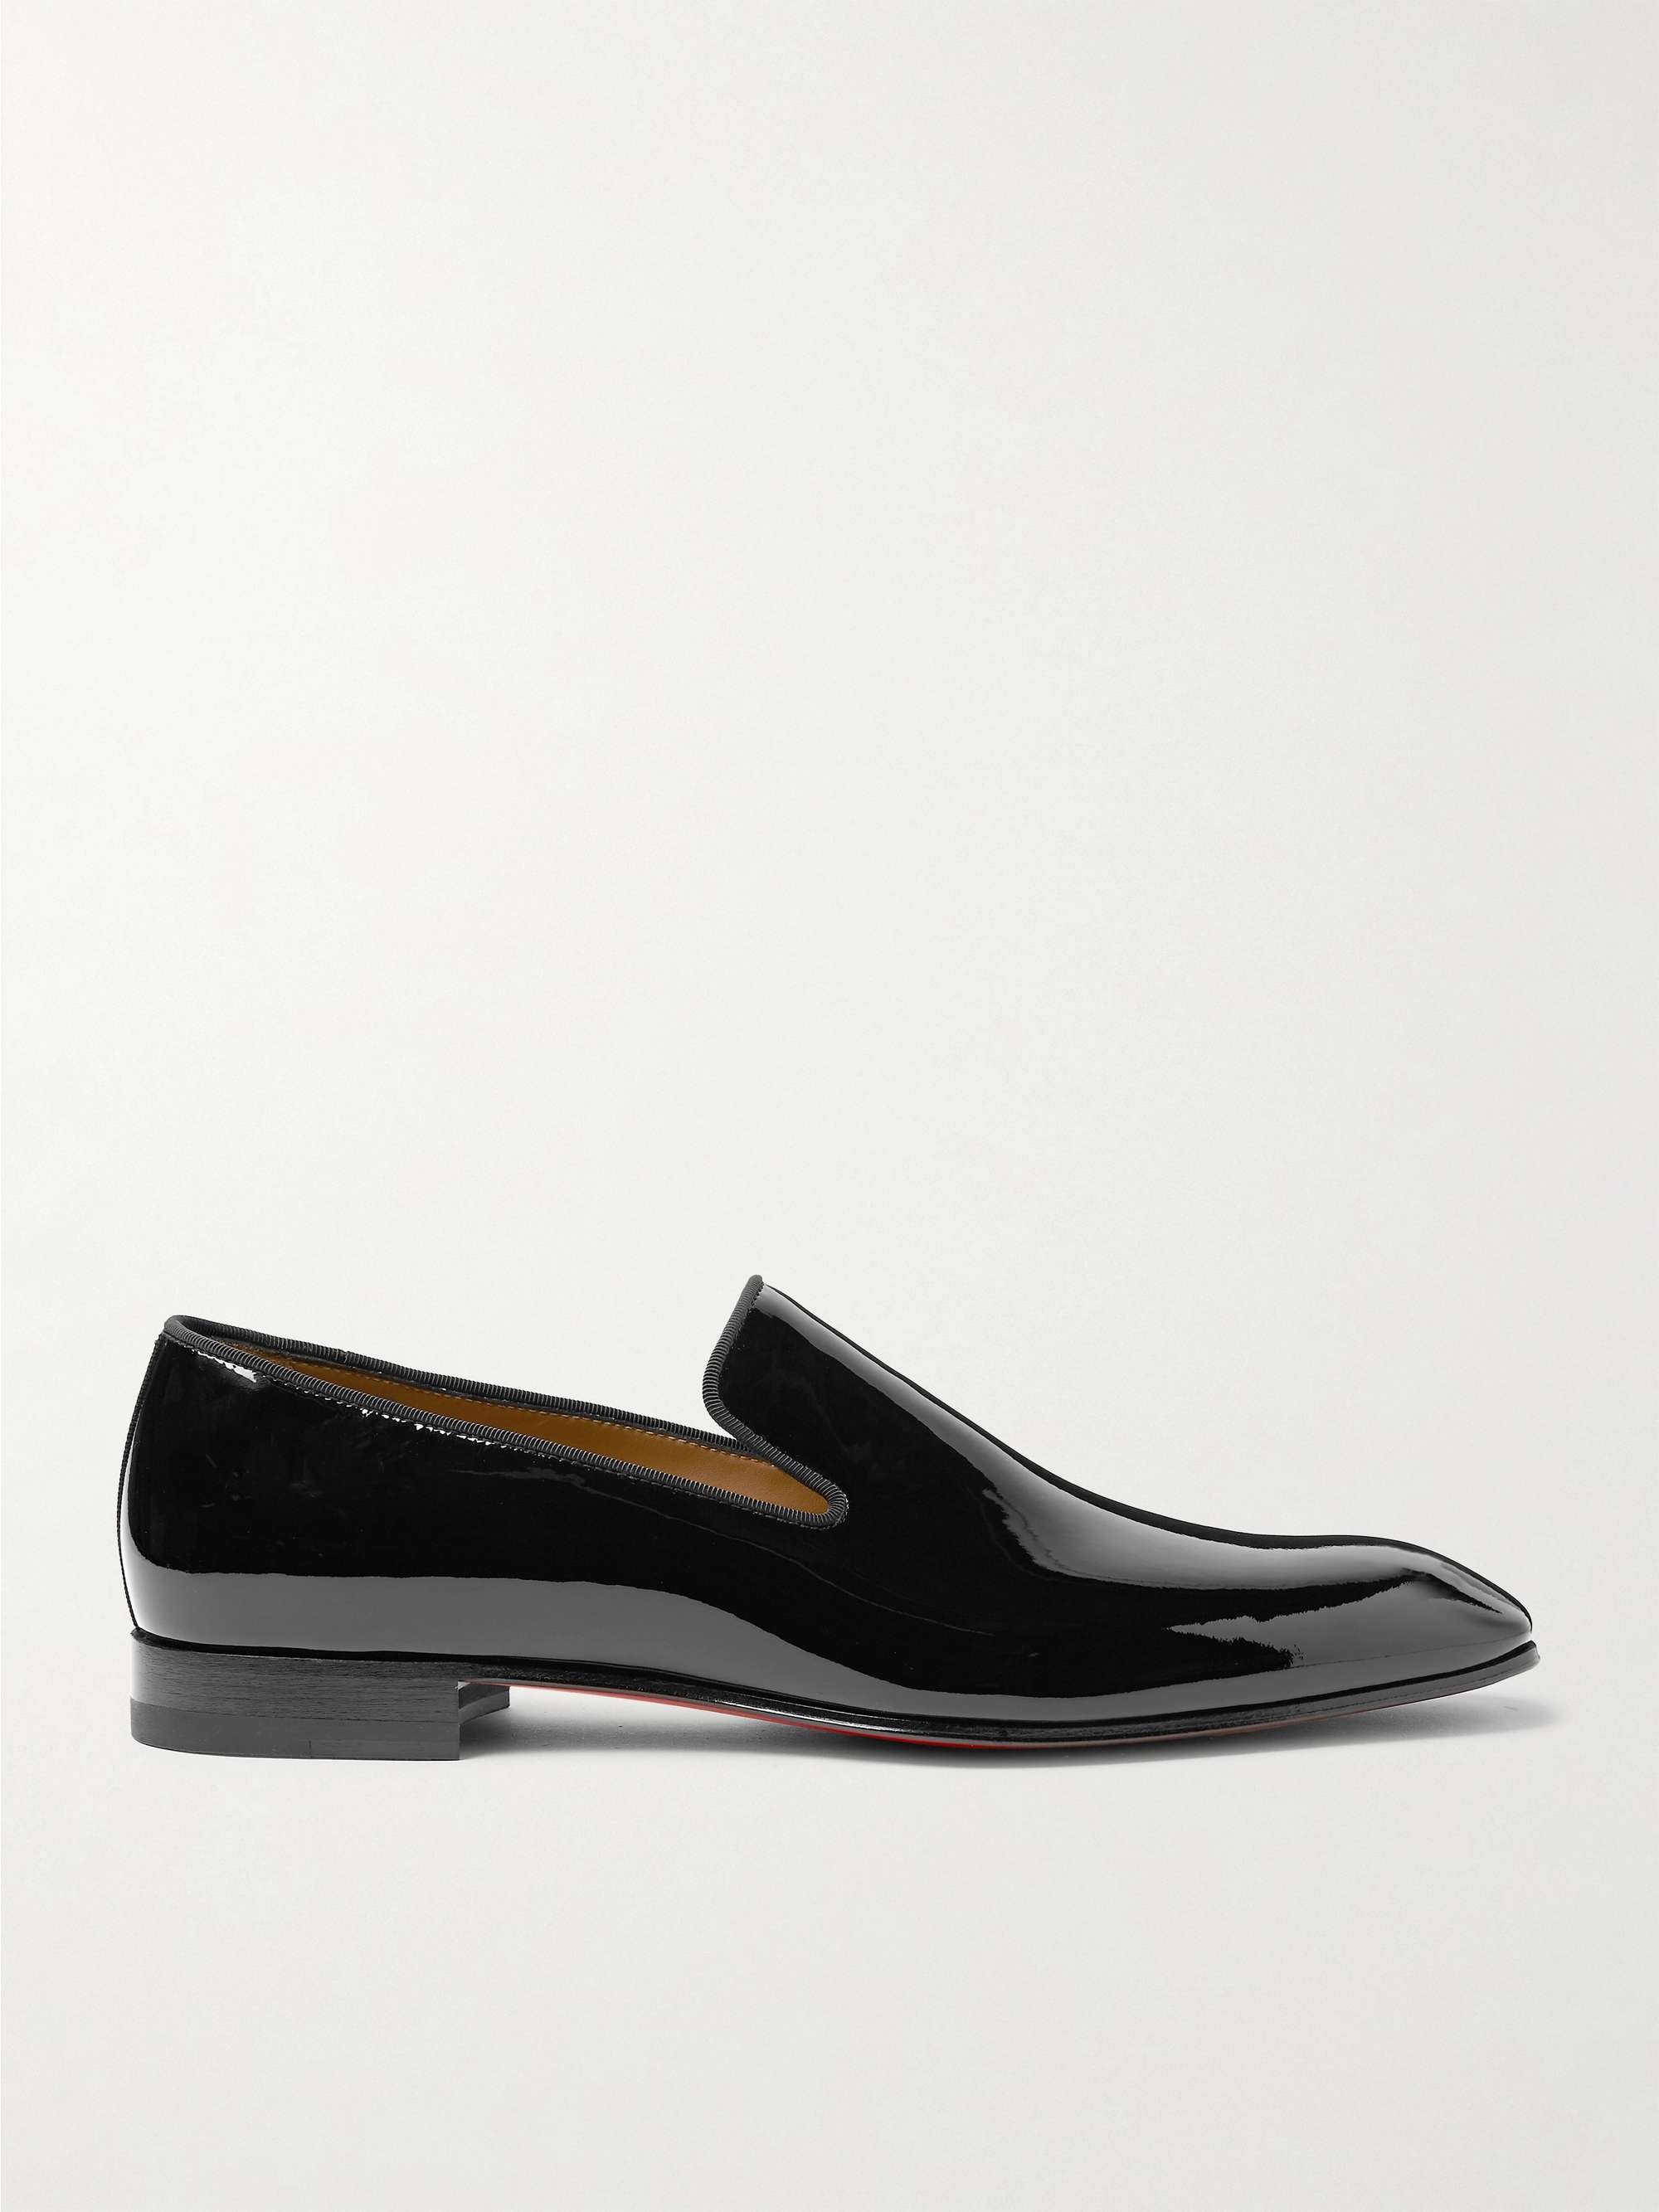 CHRISTIAN LOUBOUTIN Dandelion Grosgrain-Trimmed Patent-Leather Loafers ...